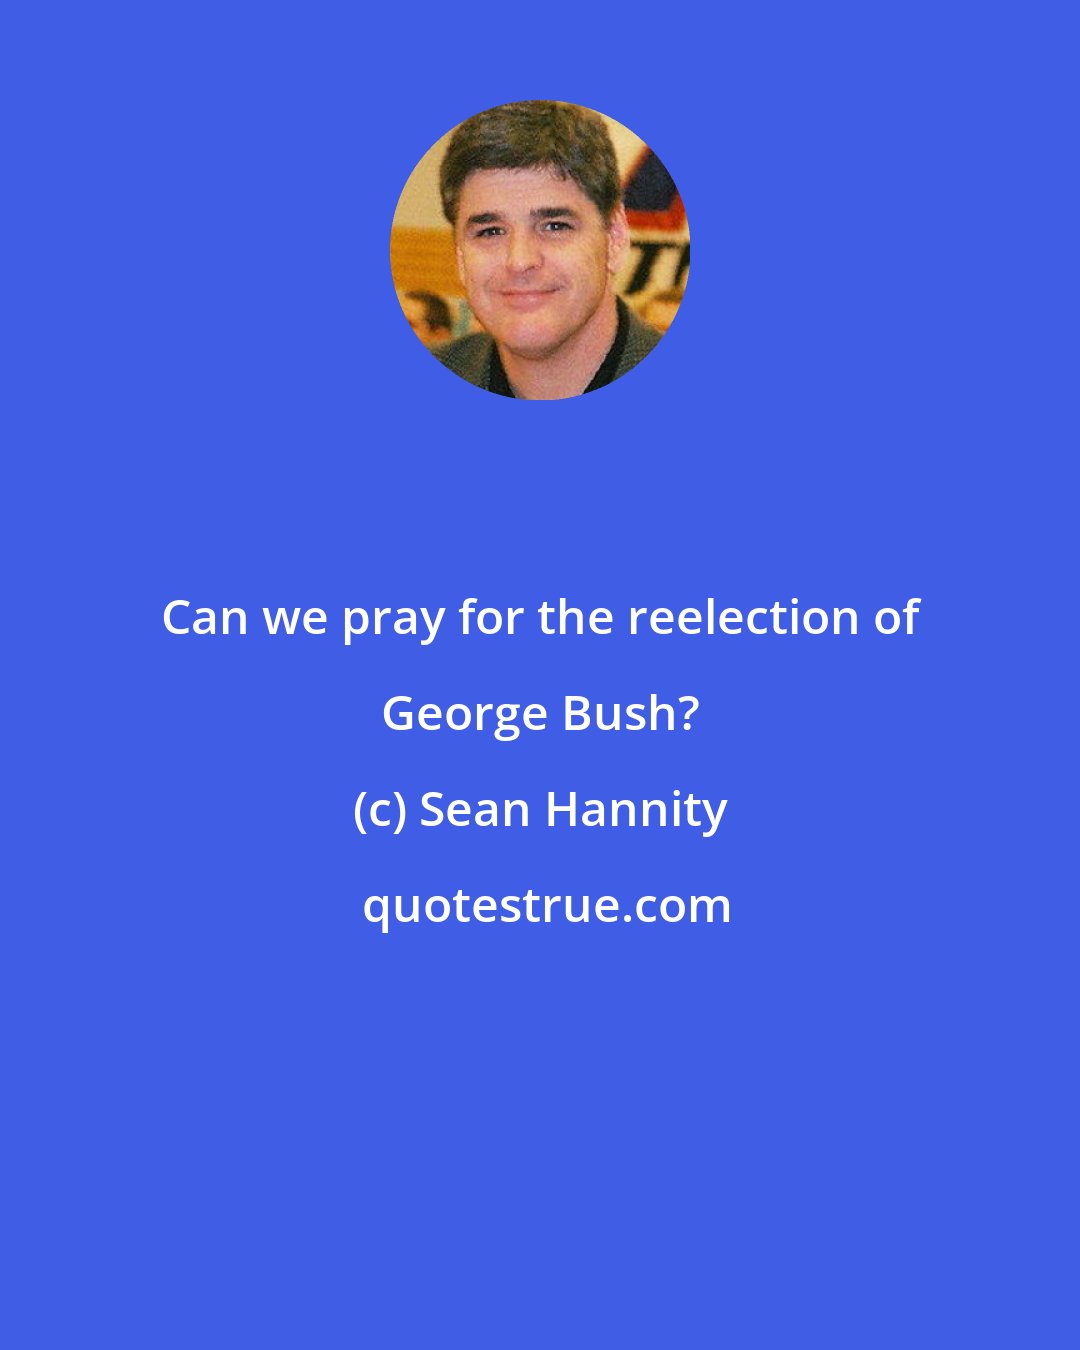 Sean Hannity: Can we pray for the reelection of George Bush?